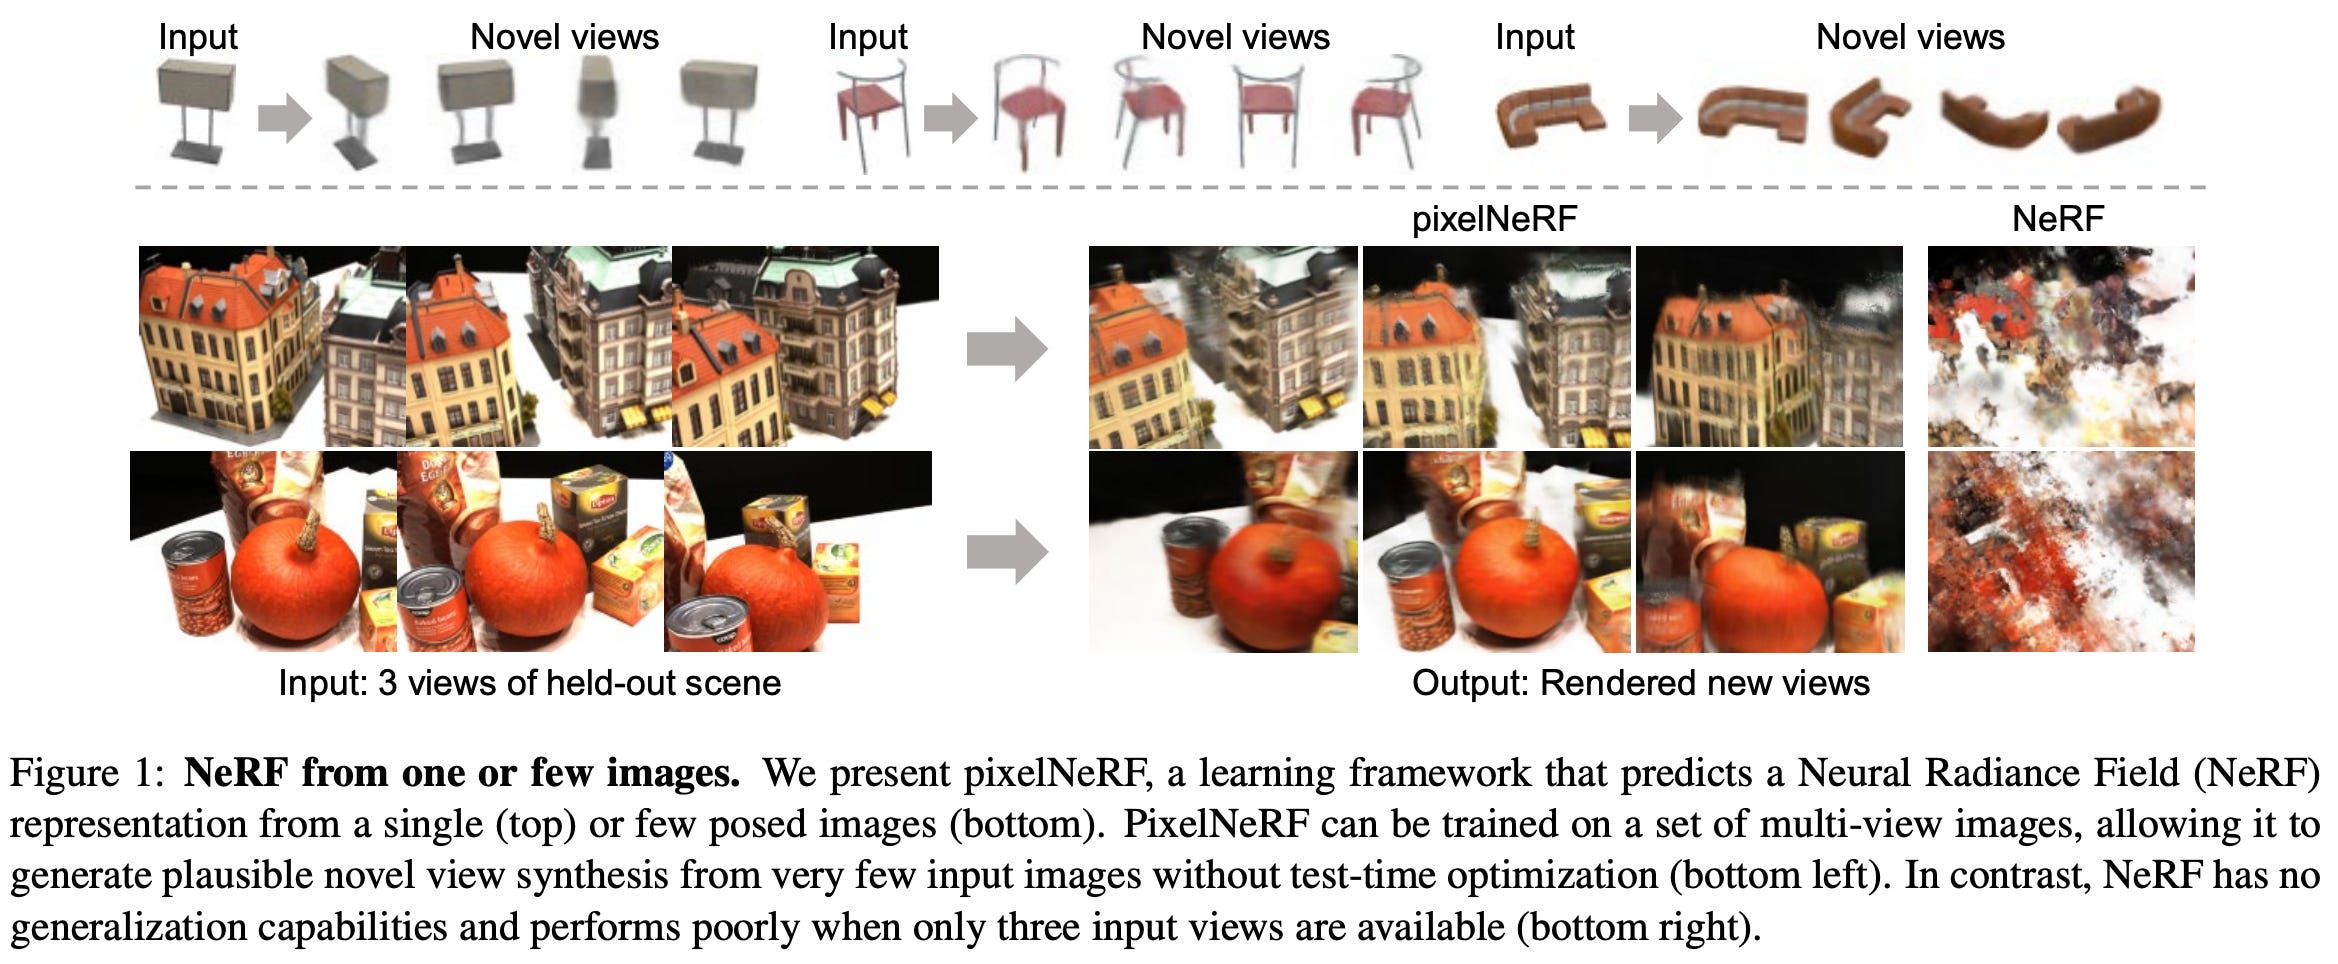 3D Generative Modeling with DeepSDF, by Cameron R. Wolfe, Ph.D.